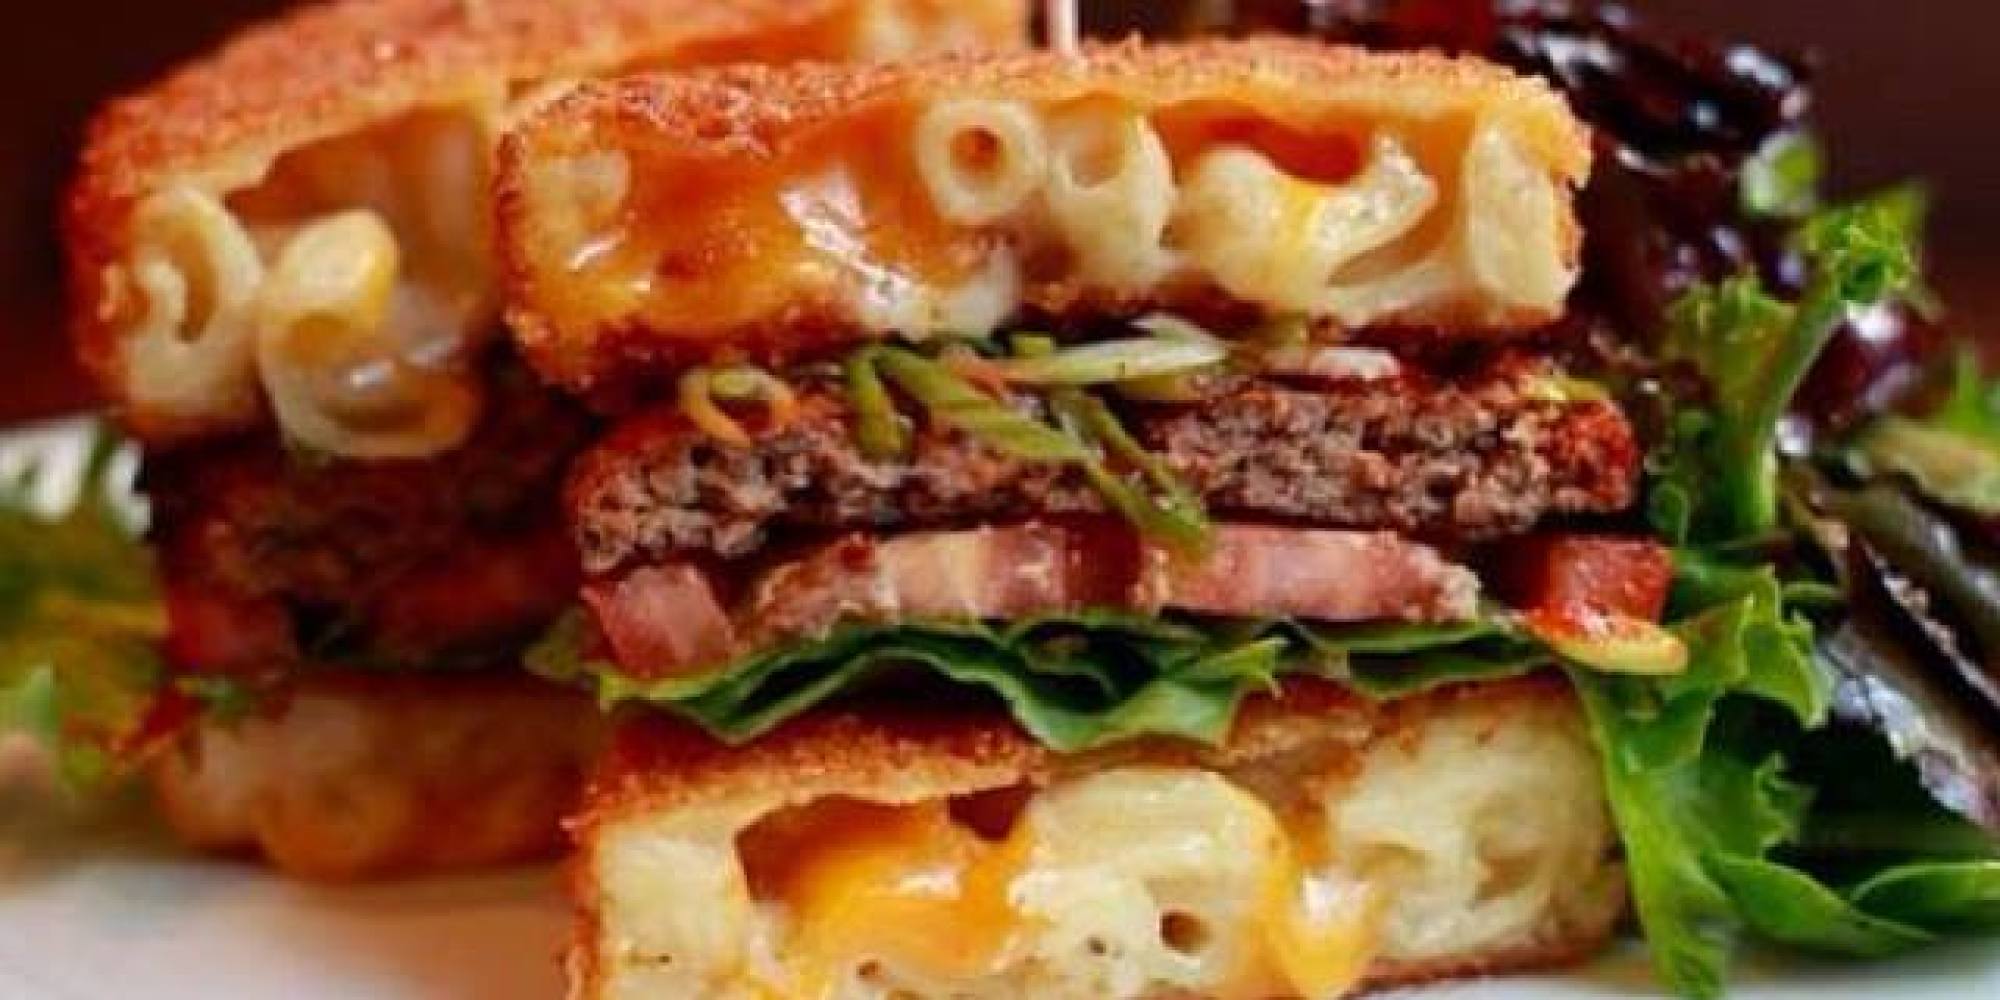 Every Way With Mac And Cheese Burgers (PHOTOS) | HuffPost